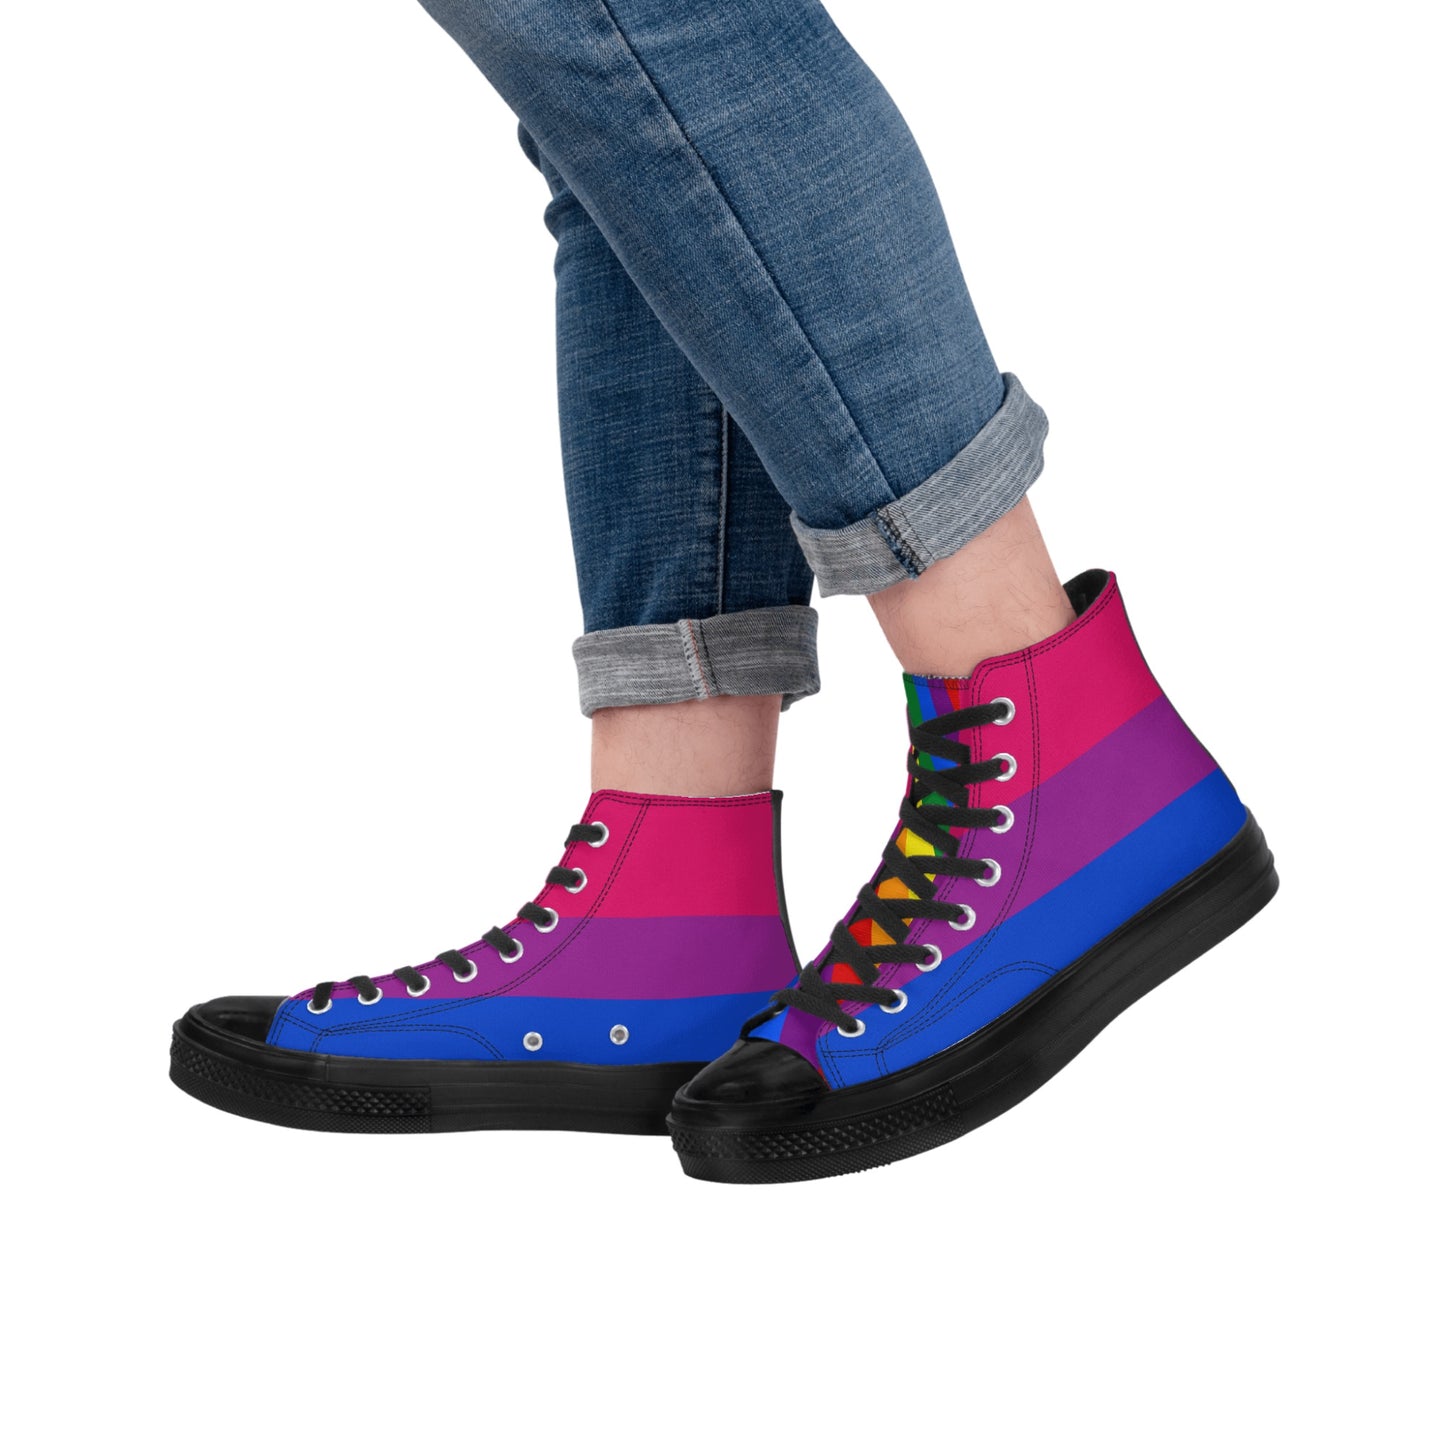 Bisexual Pride Collection - Mens Classic Black High Top Canvas Shoes for the LGBTQIA+ community